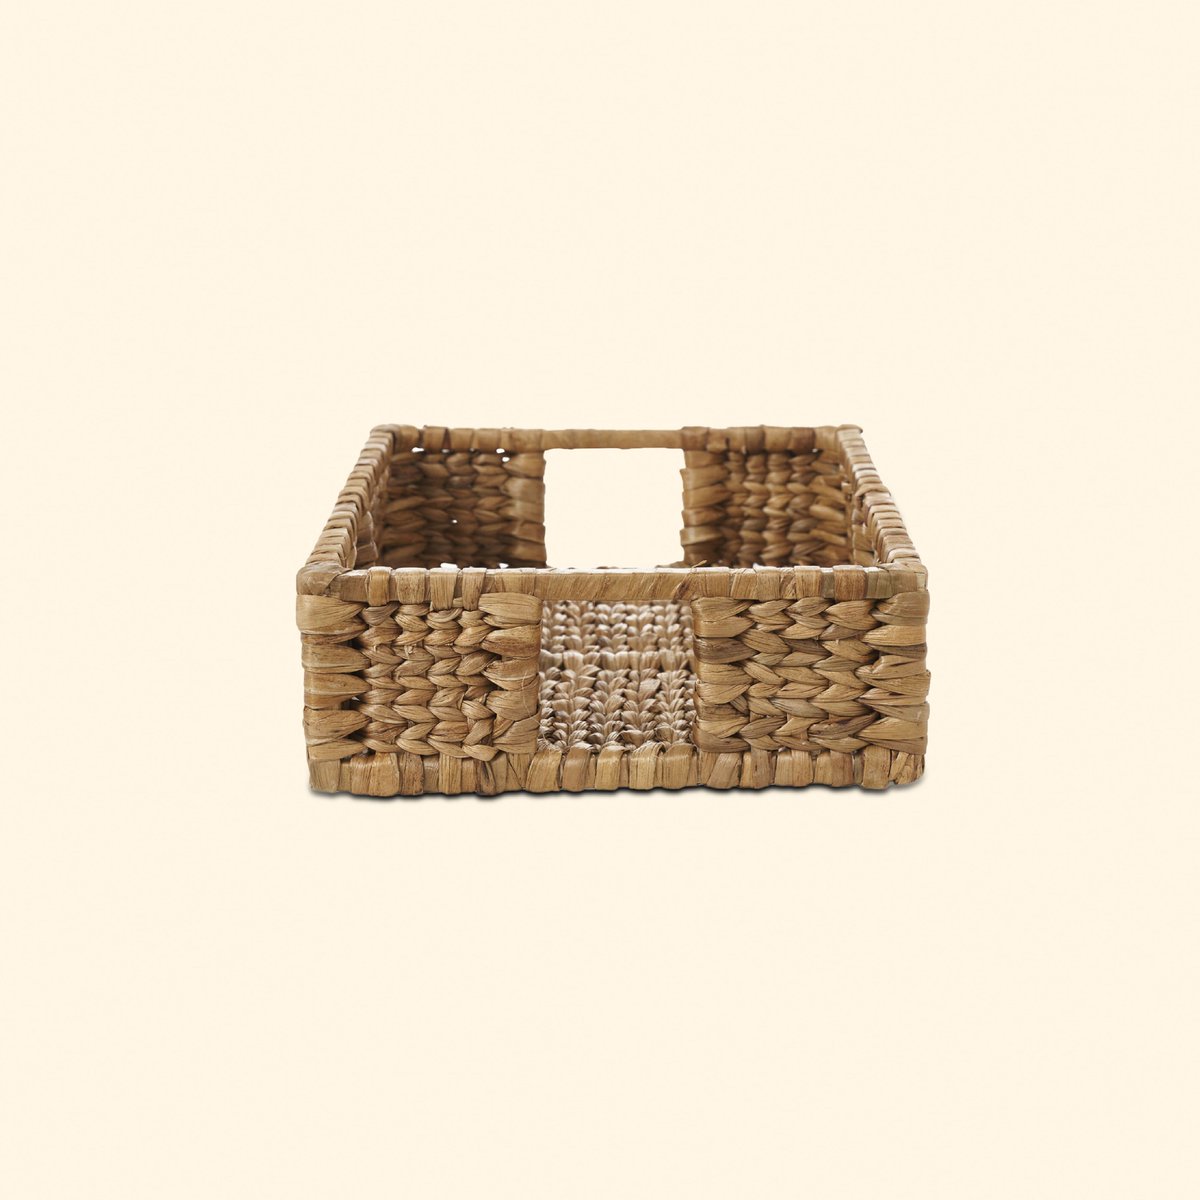 Assam lends its verdant touch by upcycling water hyacinth (Pani Meteka) into a smart storage organiser. Robustly woven and balanced with wood, it is perfect for putting petite things in place.

#SwadeshOnline #WaterHyacinth